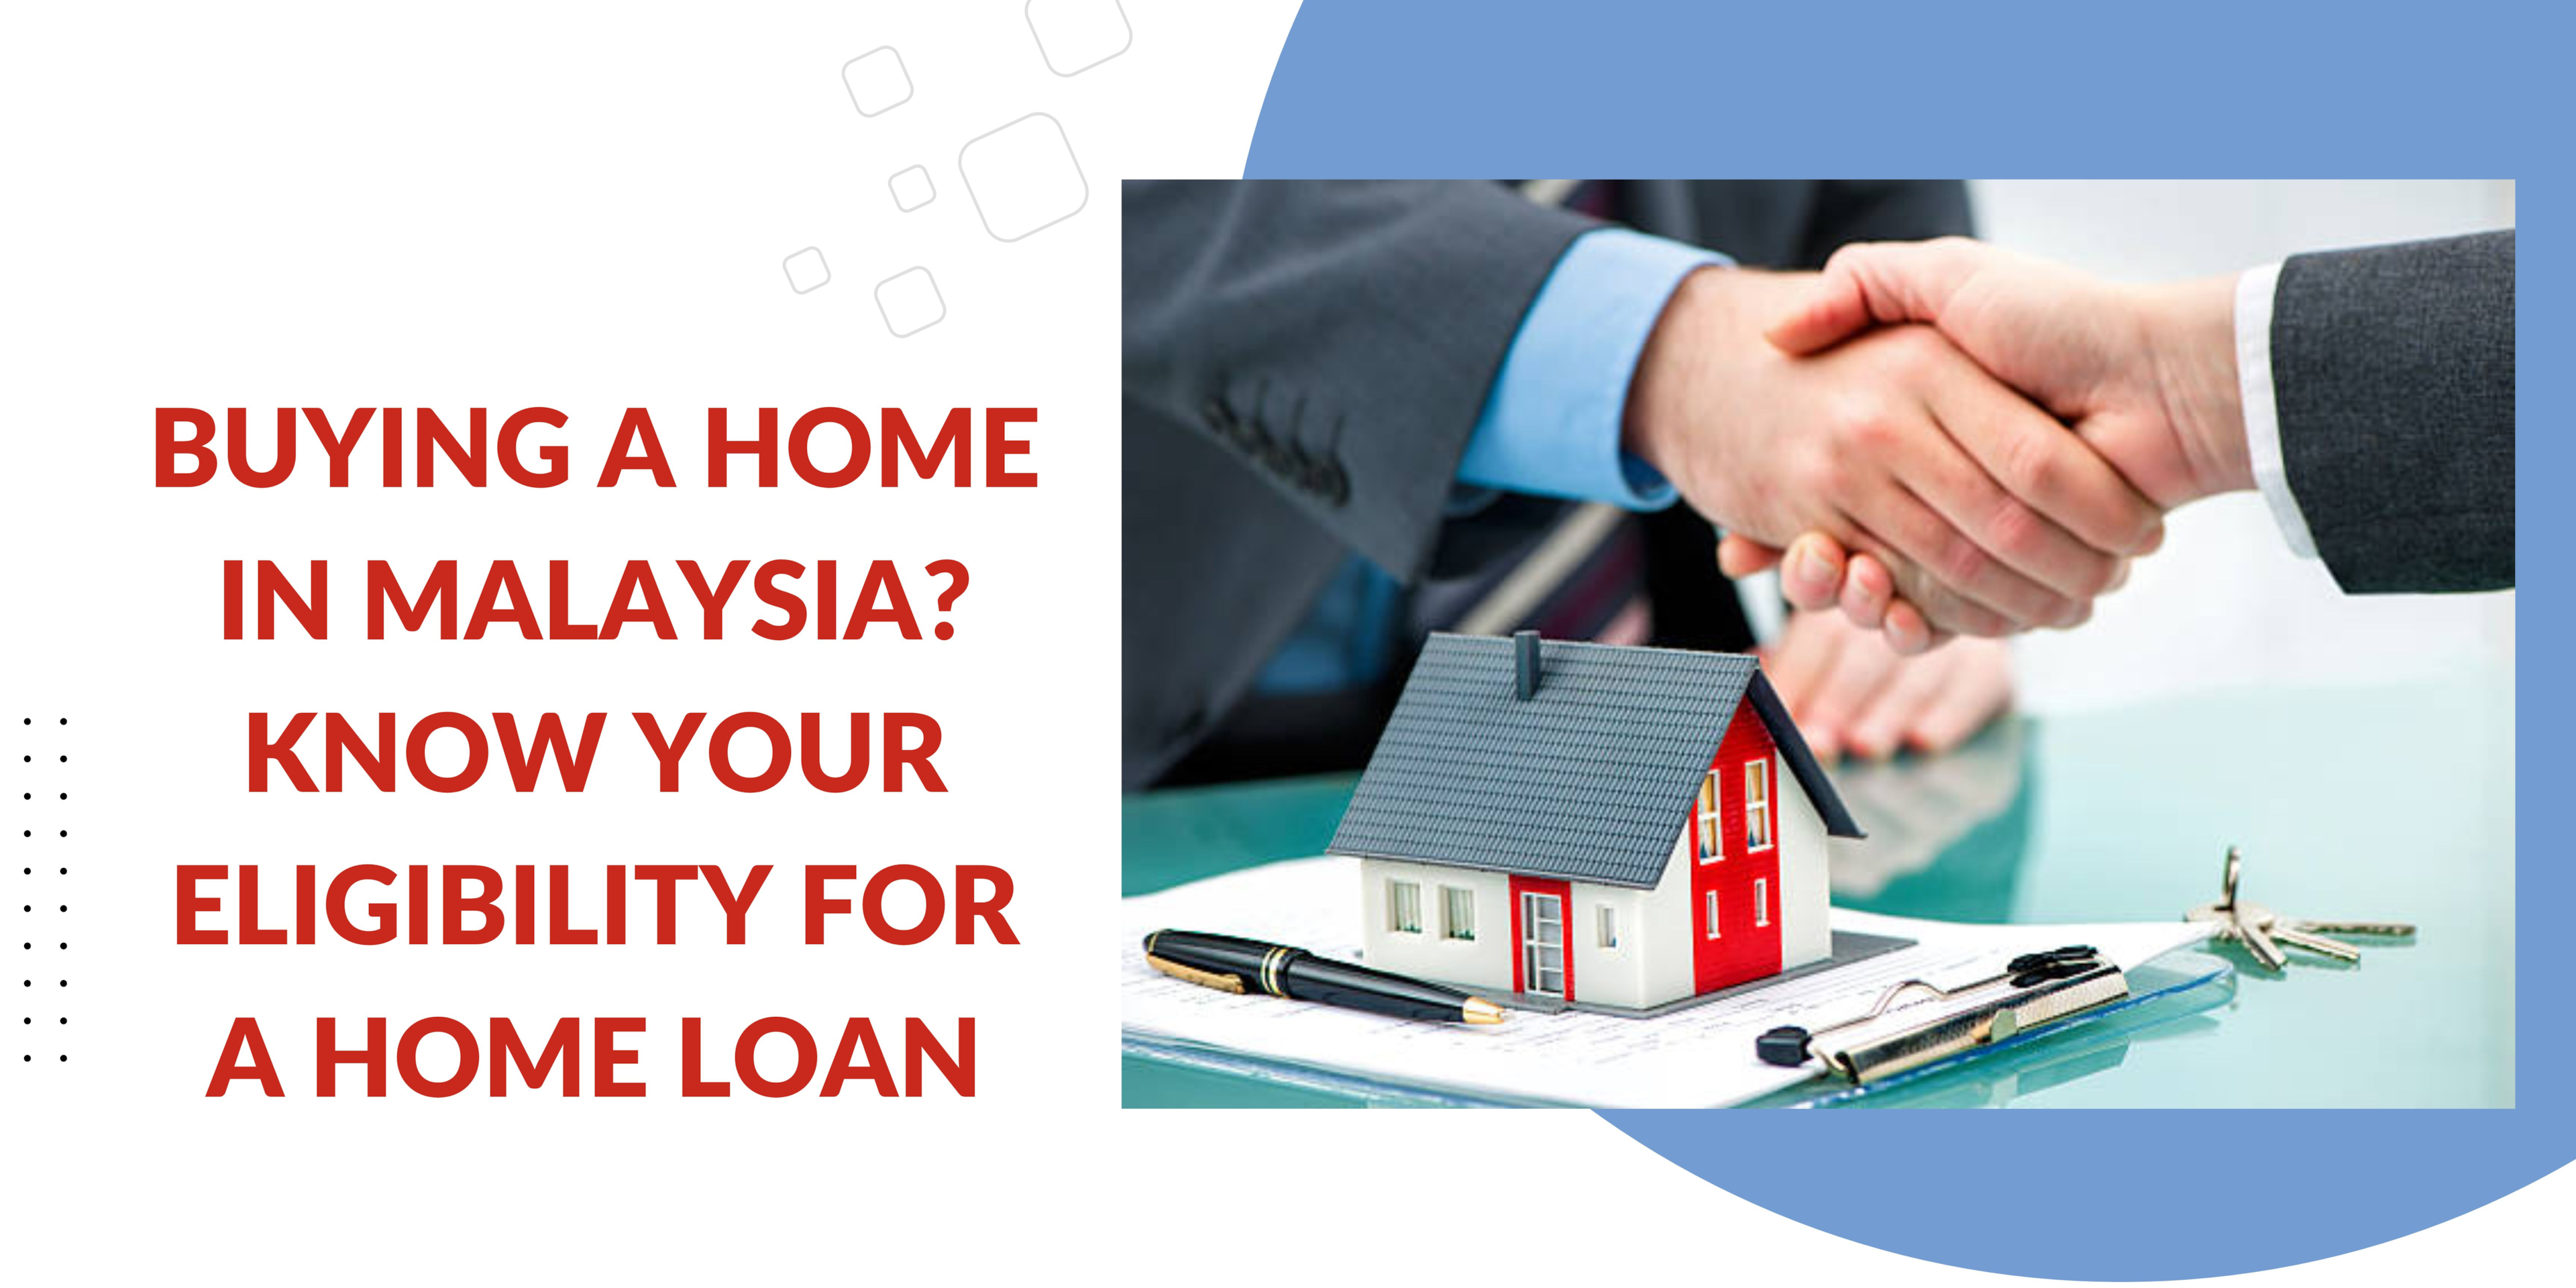 Buying a home in Malaysia? Know your eligibility for a home loan